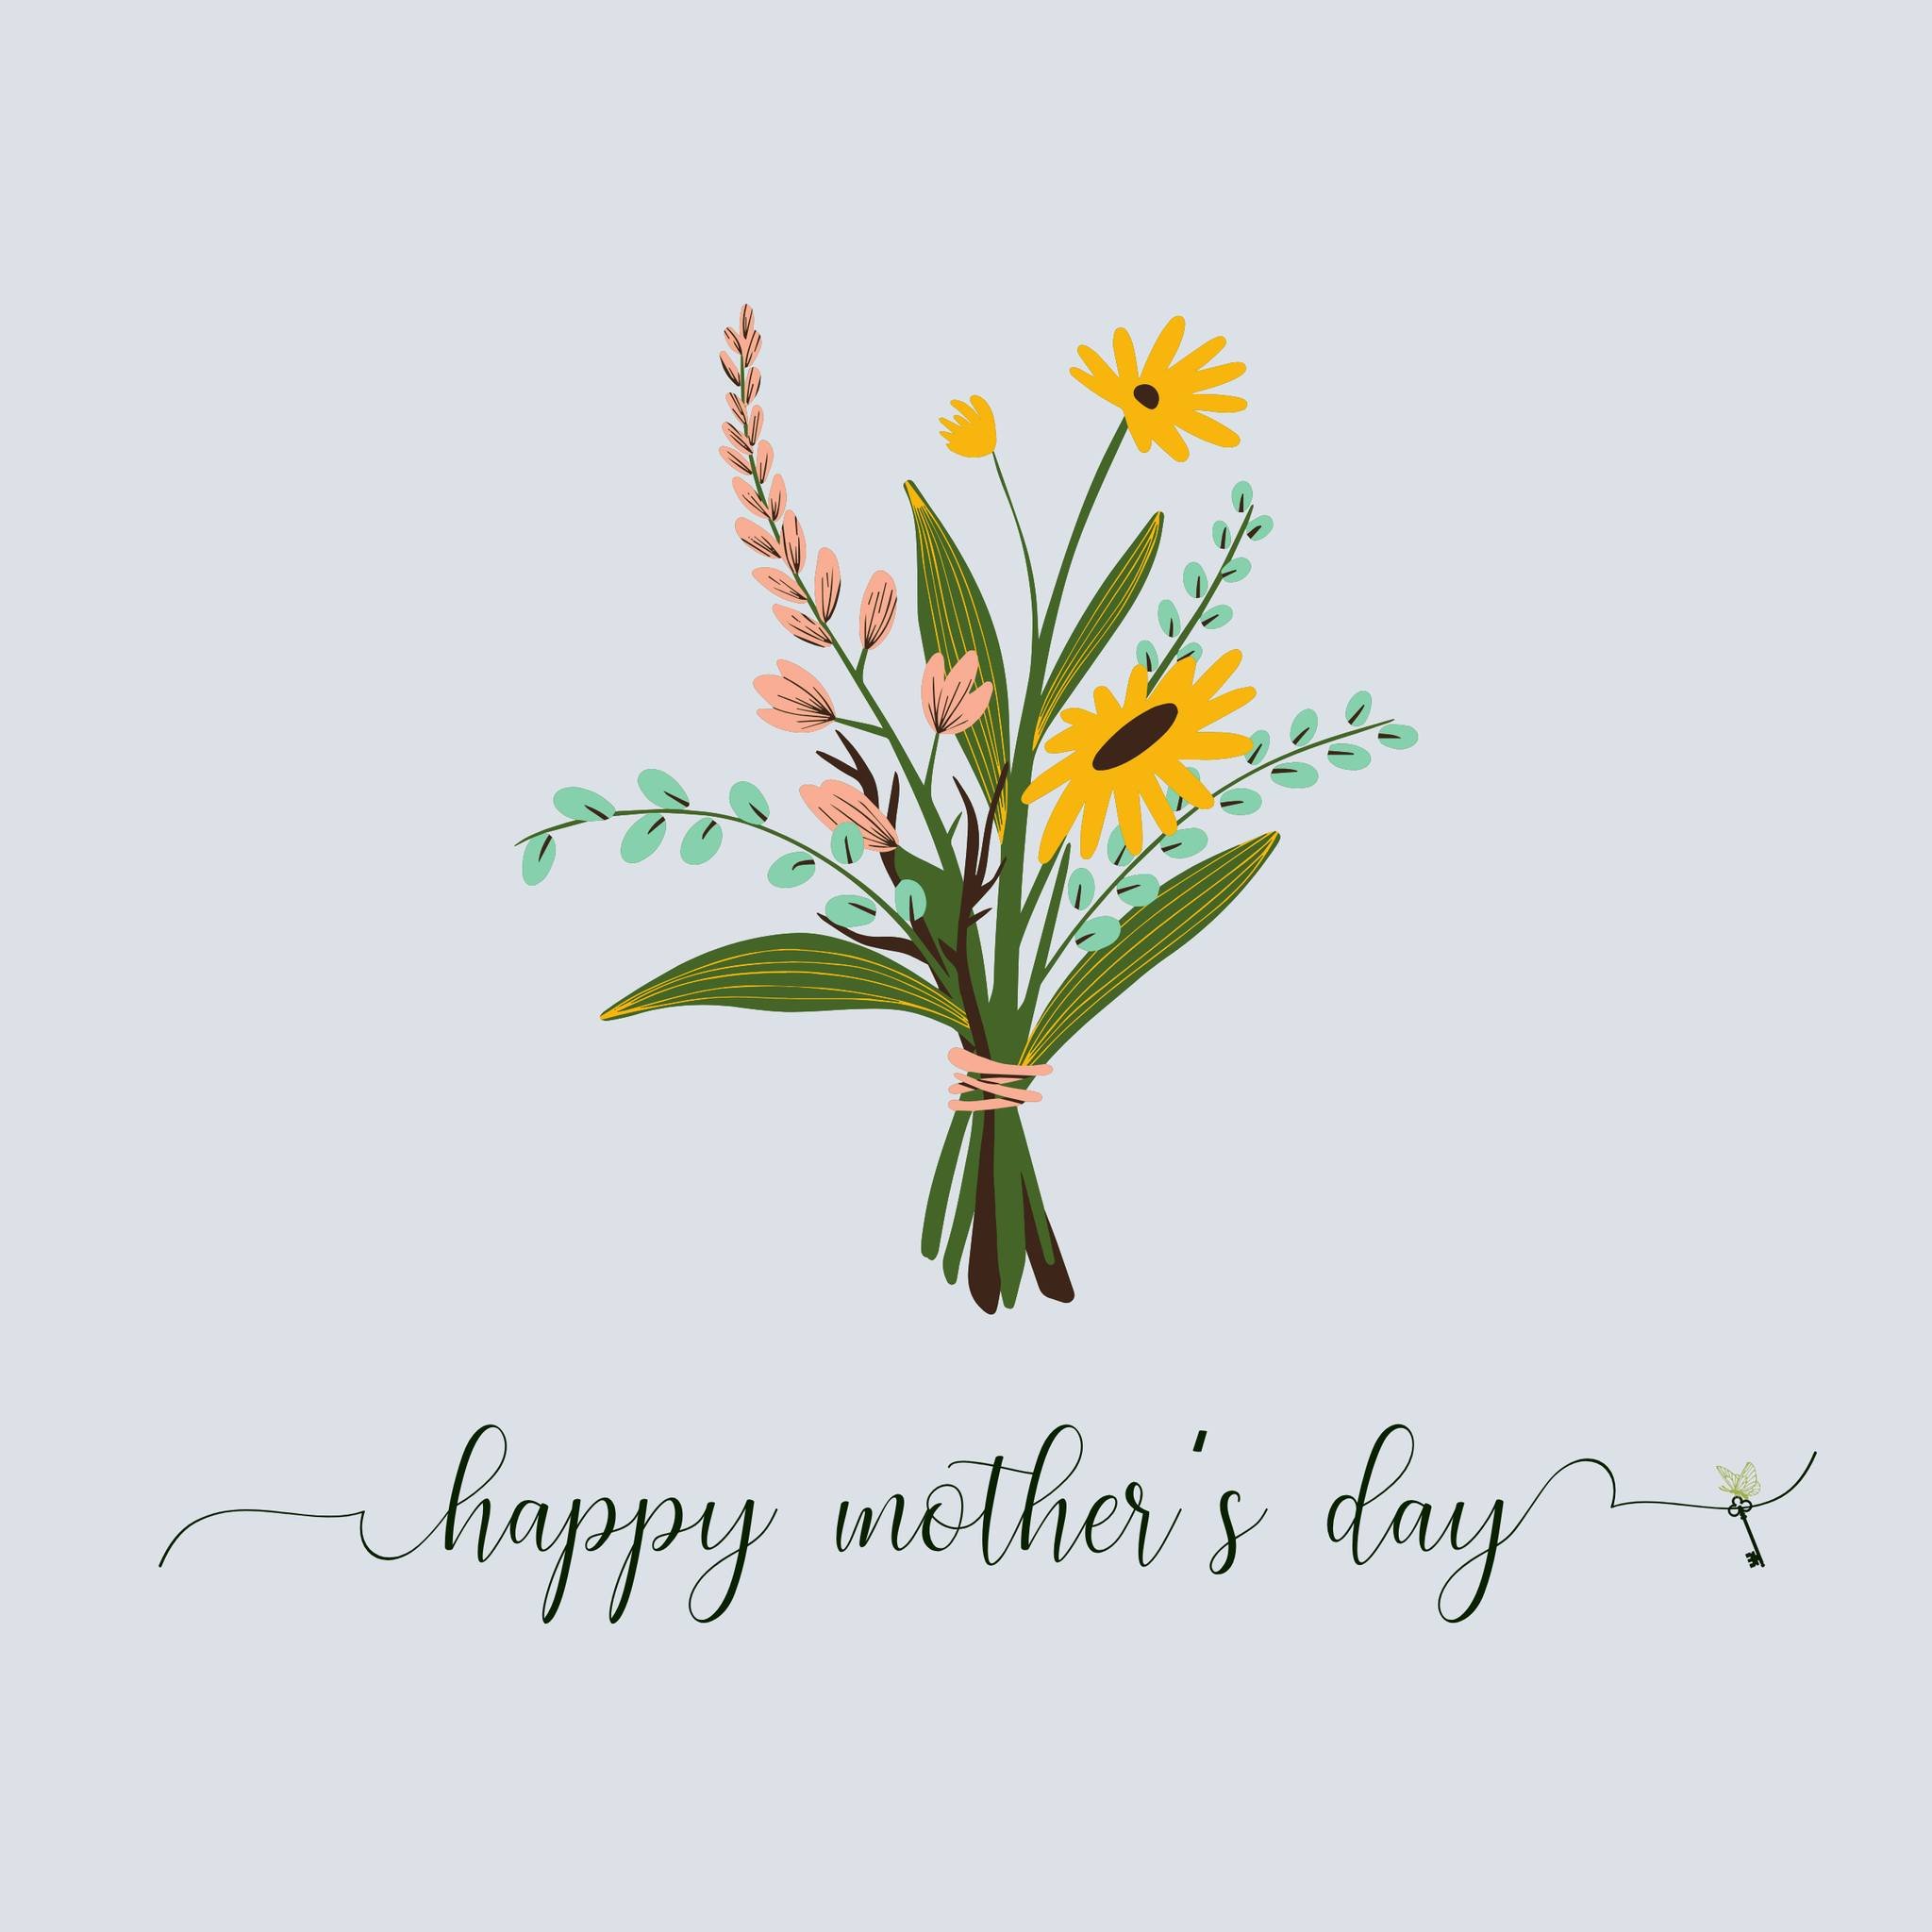 Happy Mother&rsquo;s Day to all of you incredible 🌸MOMS🌸 out there! Wishing you a day filled with love, joy, and appreciation, that you most definitely deserve. 💗
.
.
.
.
#mothersday #momlove #gratefulhear  #celebrate #family #realestate #sanjoser